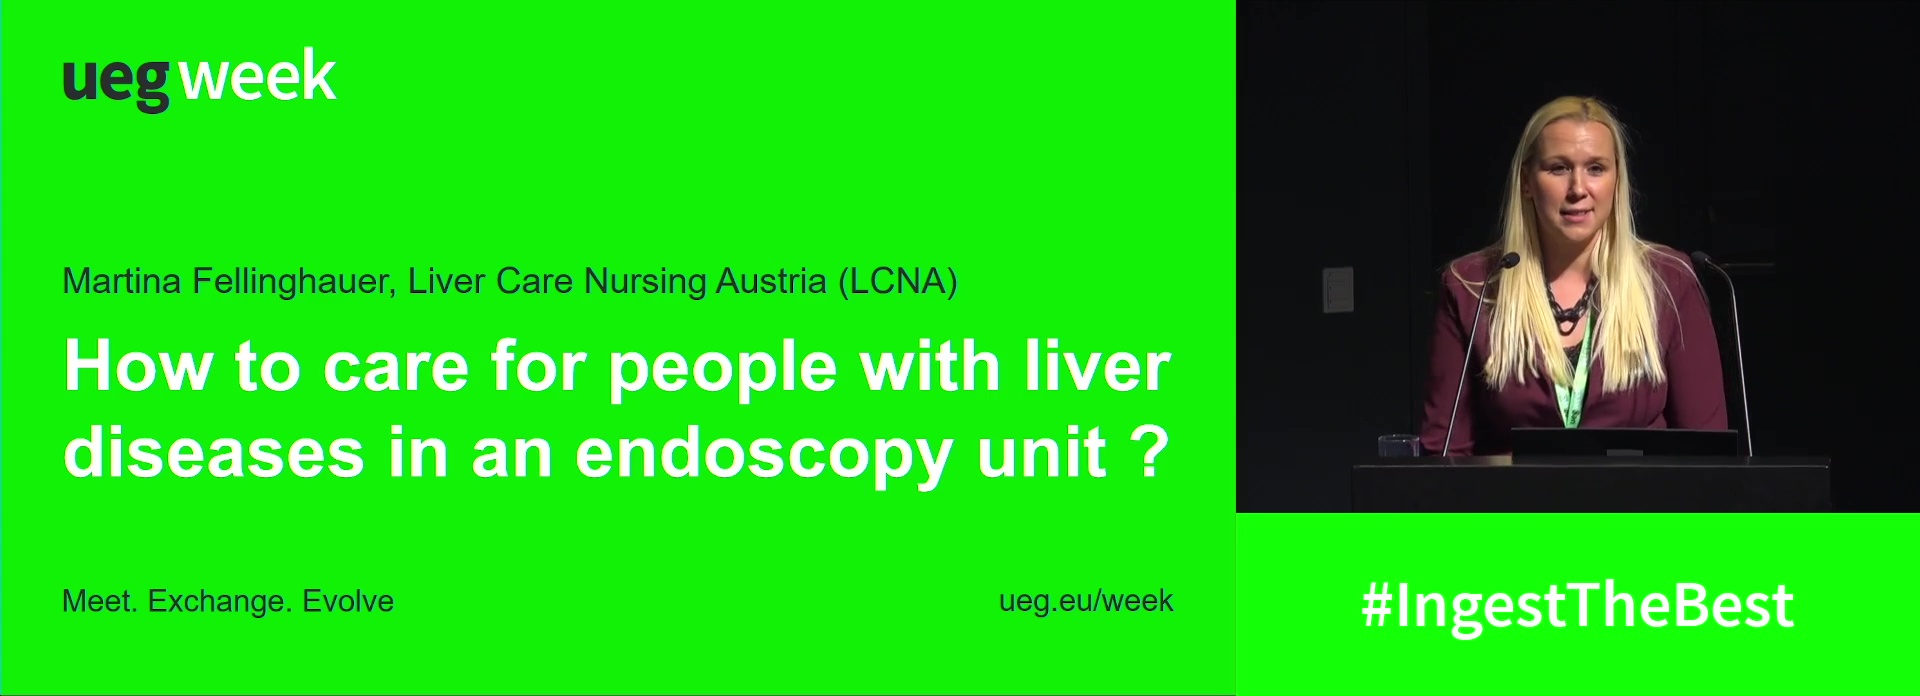 How to care for people with liver diseases in an endoscopy unit